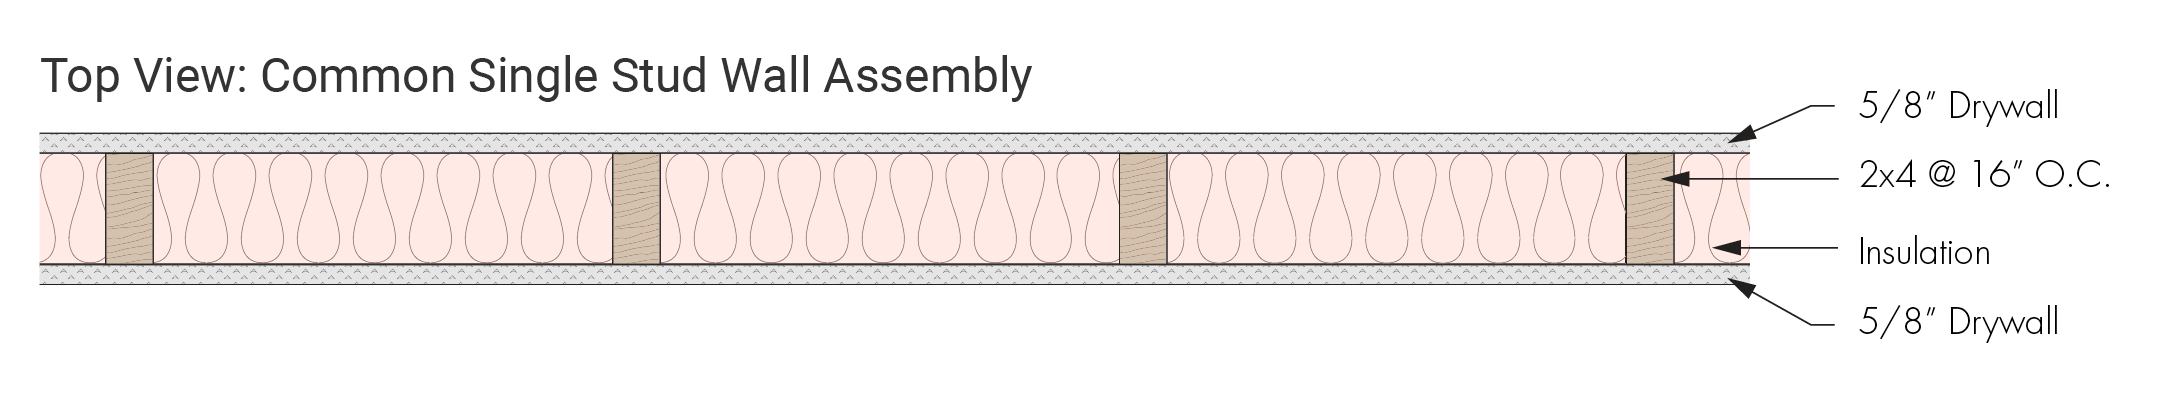 4th Favorite Wall Assembly